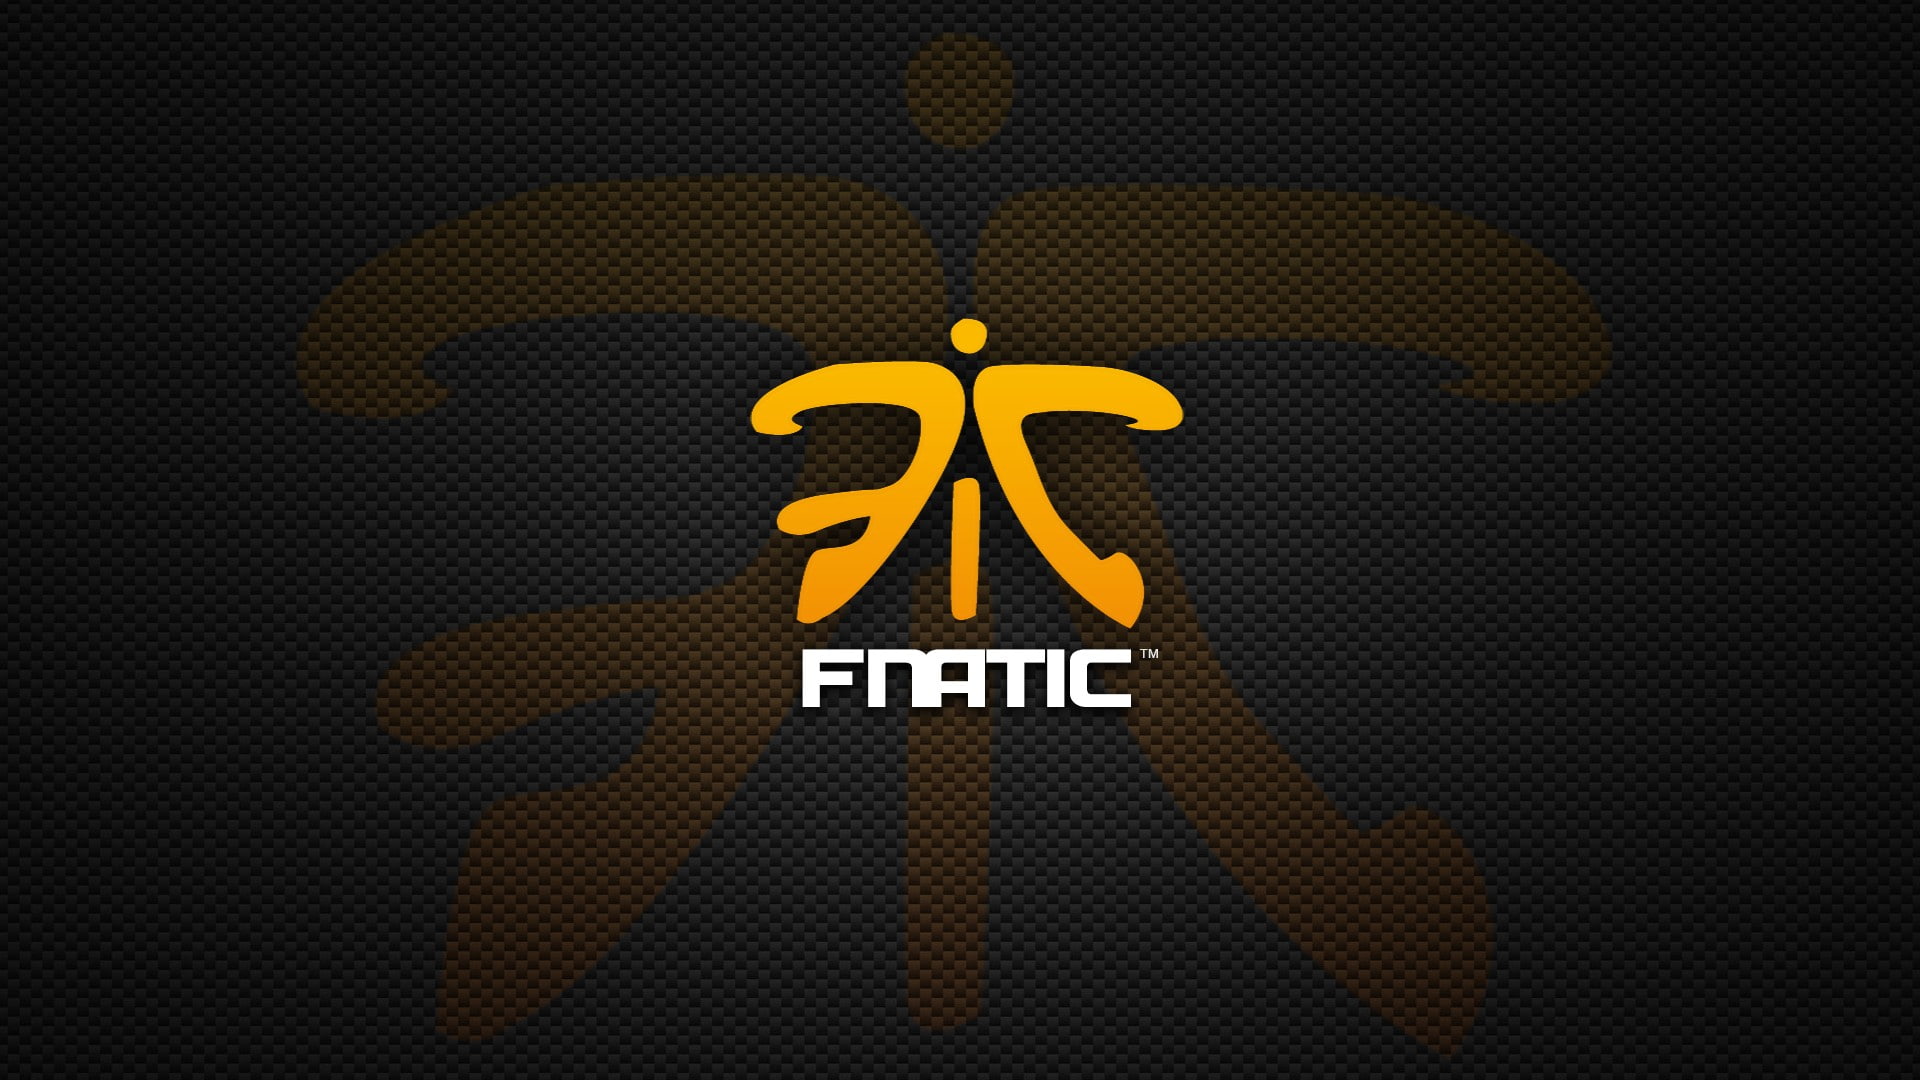 fnatic, communication, text, western script, close-up, no people